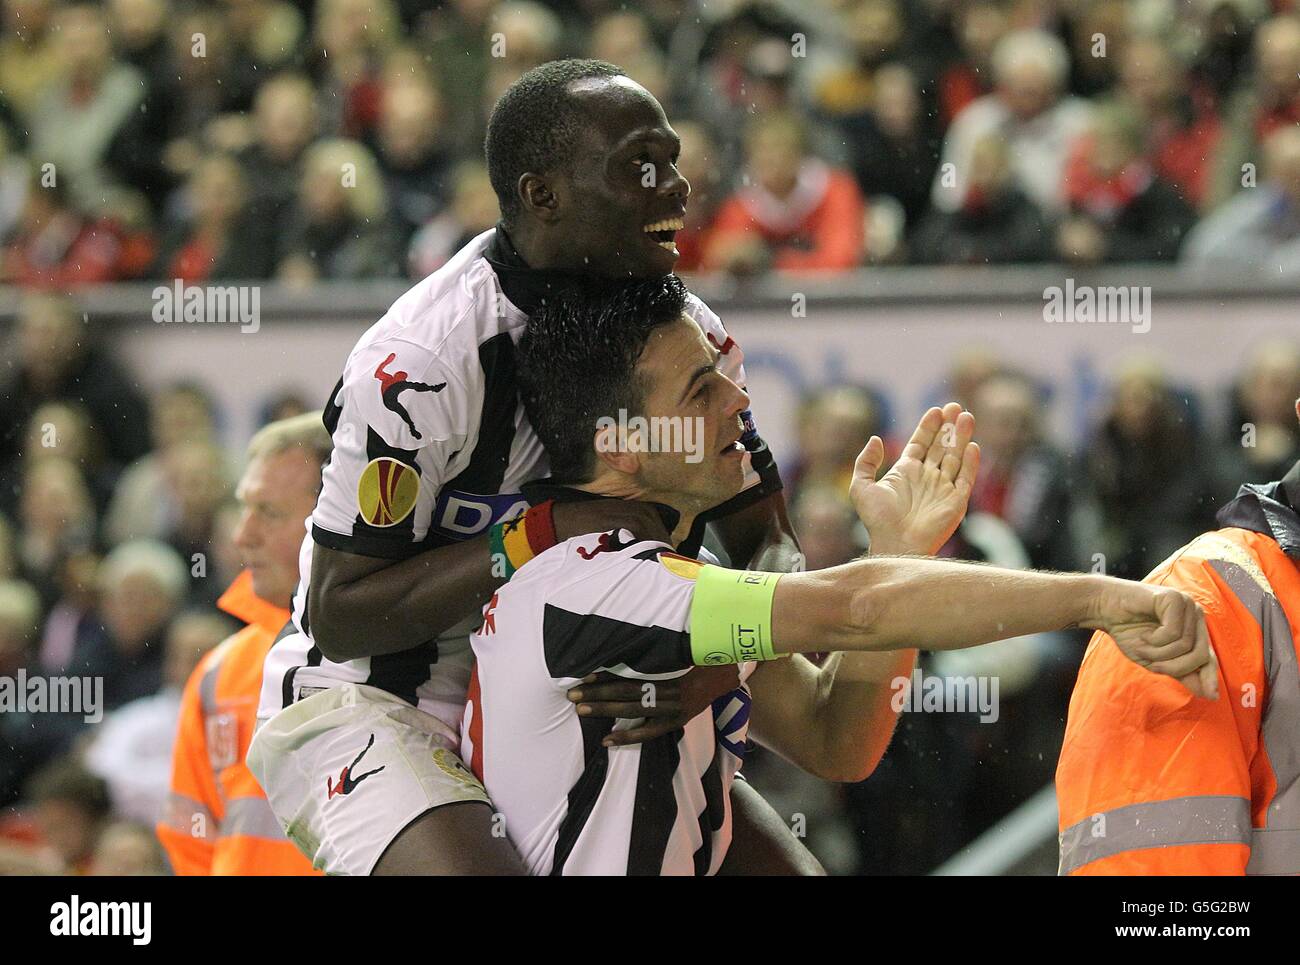 Udinese's Antonio Di Natale celebrates scoring their first goal of the game with team-mate Emmanuel Agyemang-Badu (left) Stock Photo